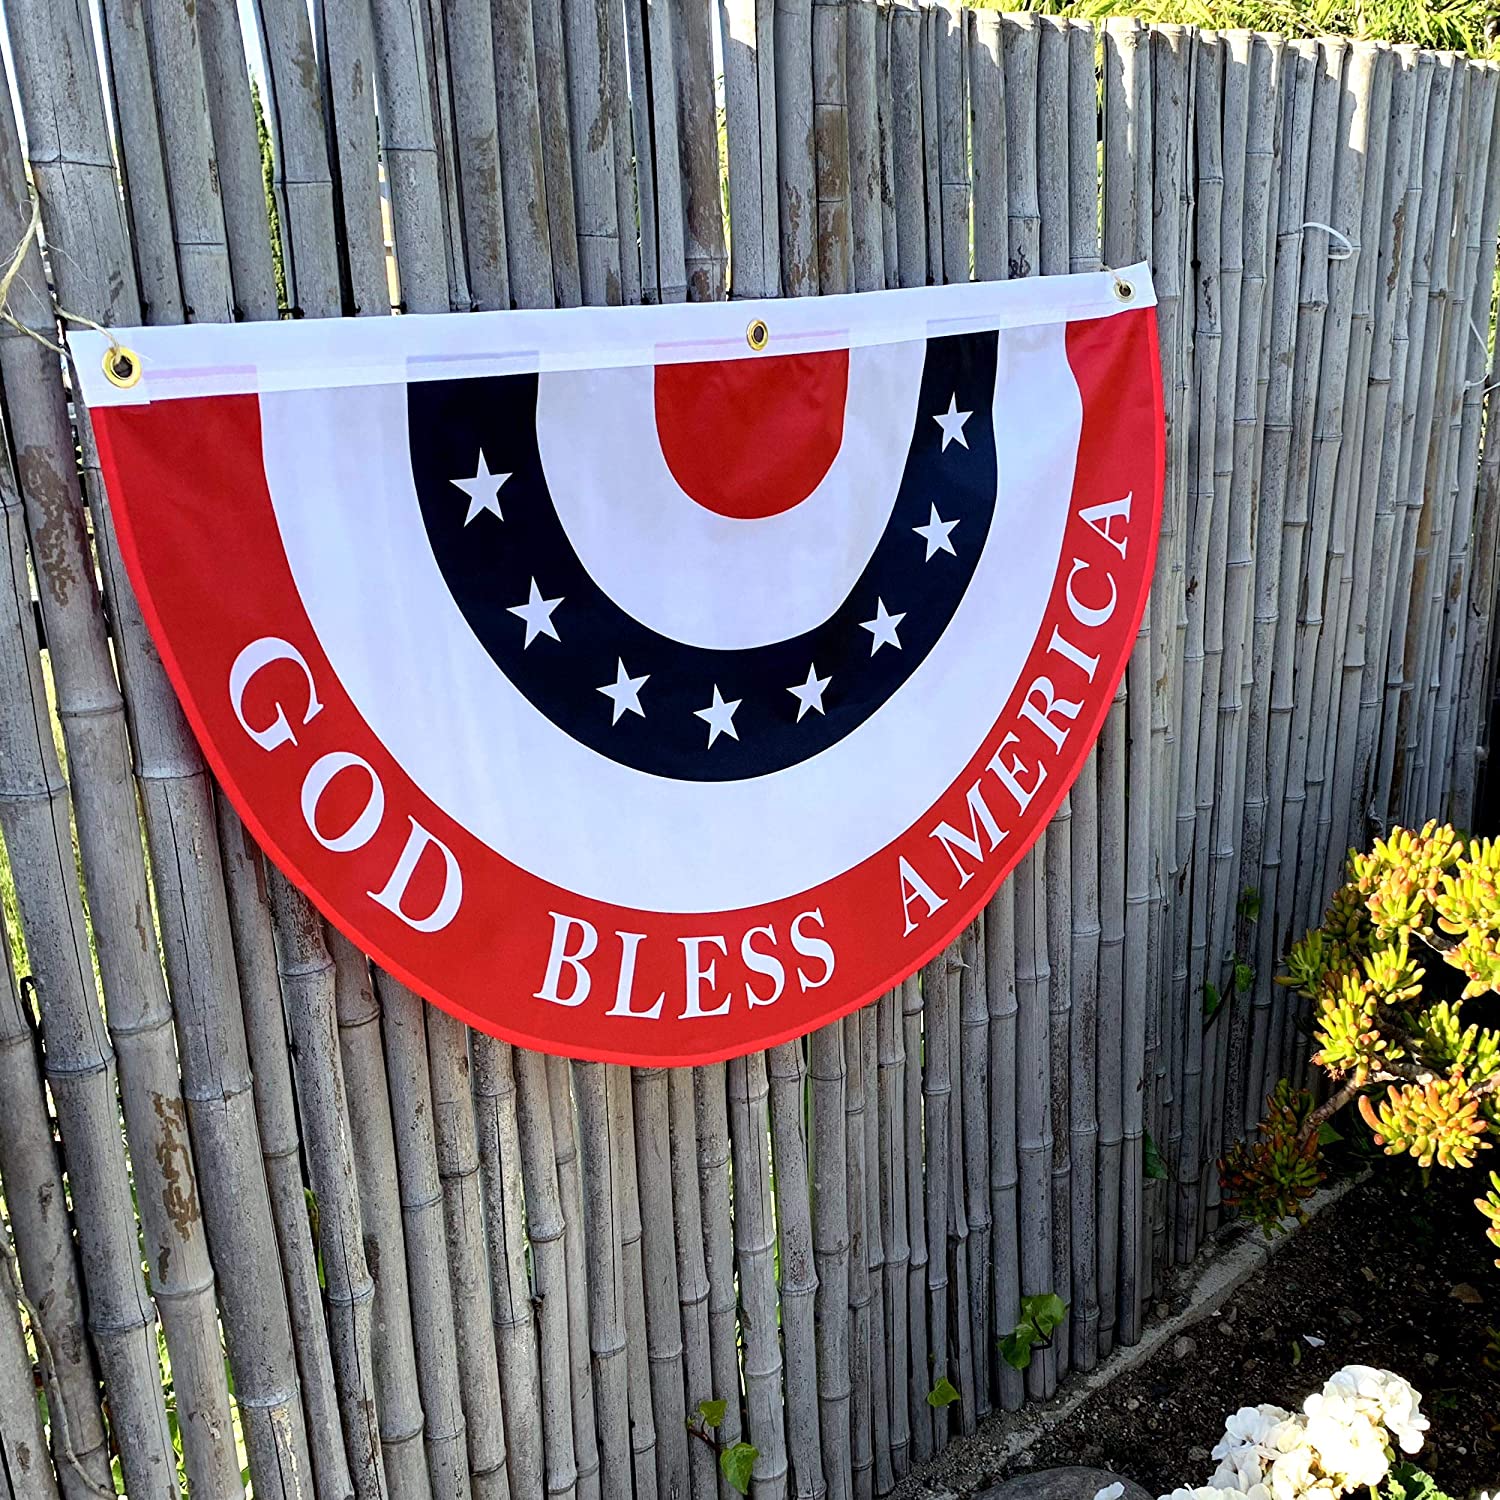 God Bless America Bunting Flag – 18” x 36”, USA, President's Day, Memorial Day, 4th of July, Patriotic Decoration, Christmas - image 2 of 6